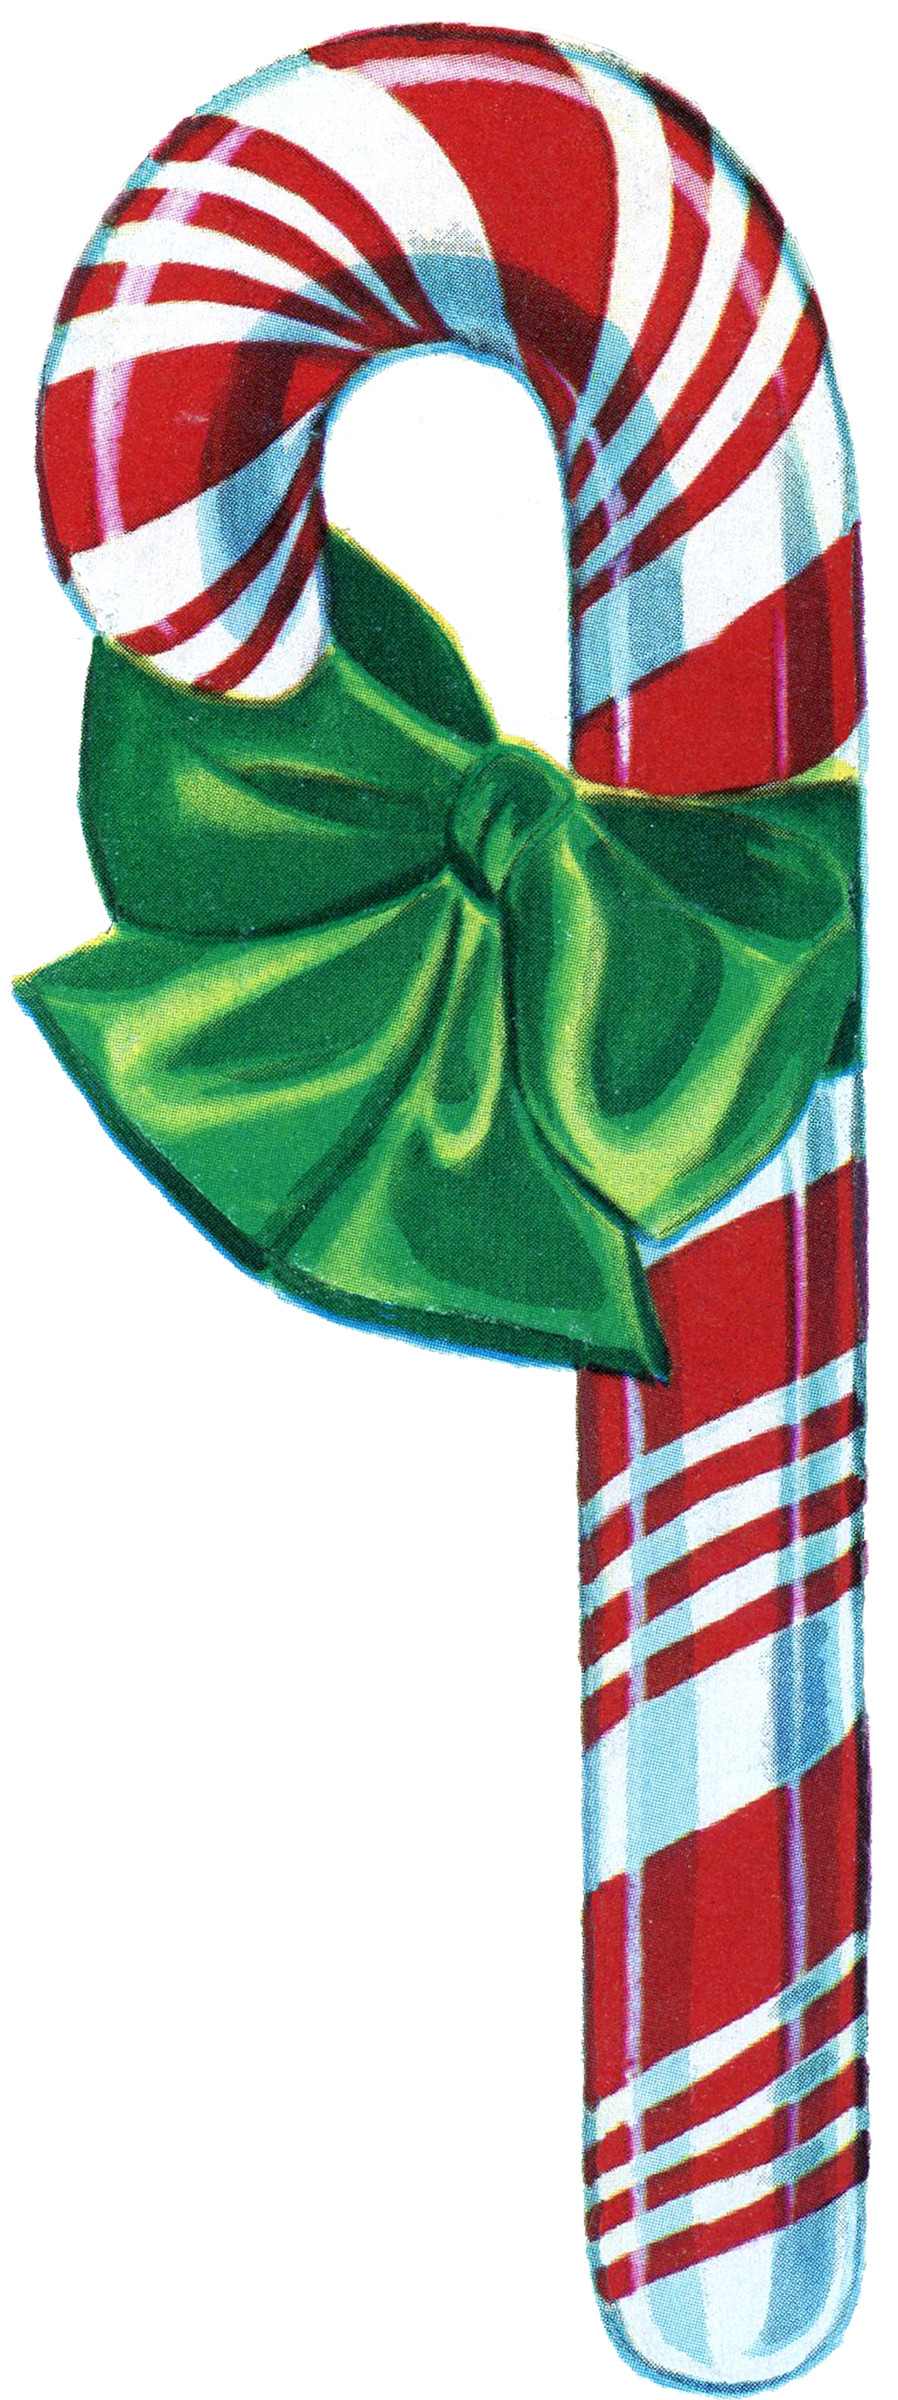 Christmas Candy Cane Clipart
 Free Vintage Christmas Clip Art Candy Cane The